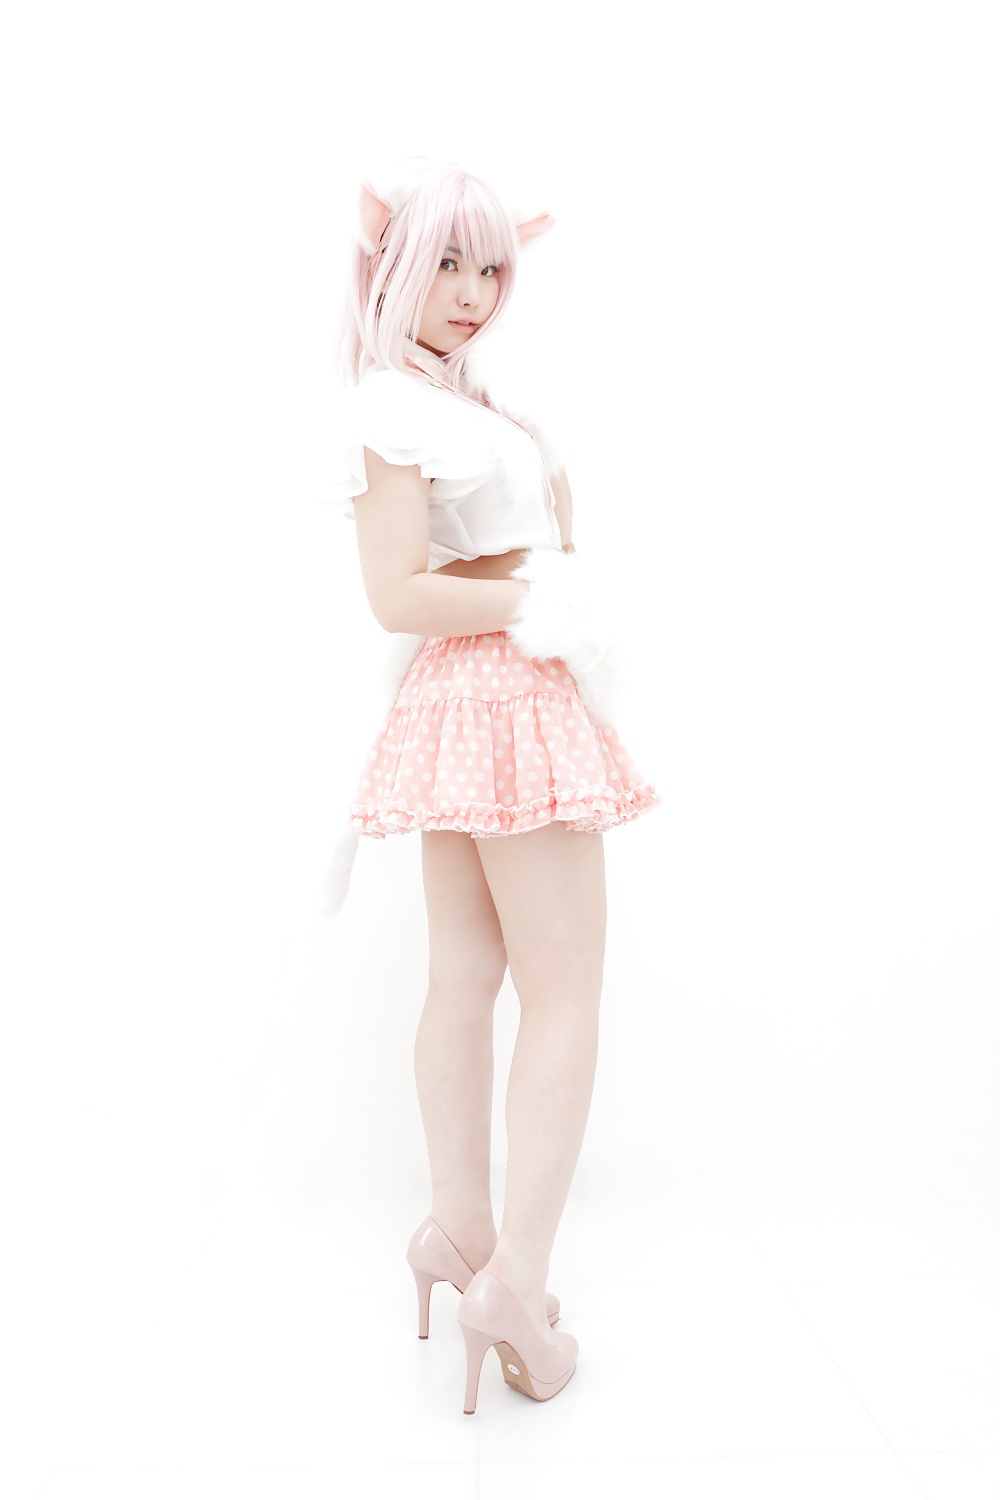 Asiatica cosplay in bianco
 #26558603